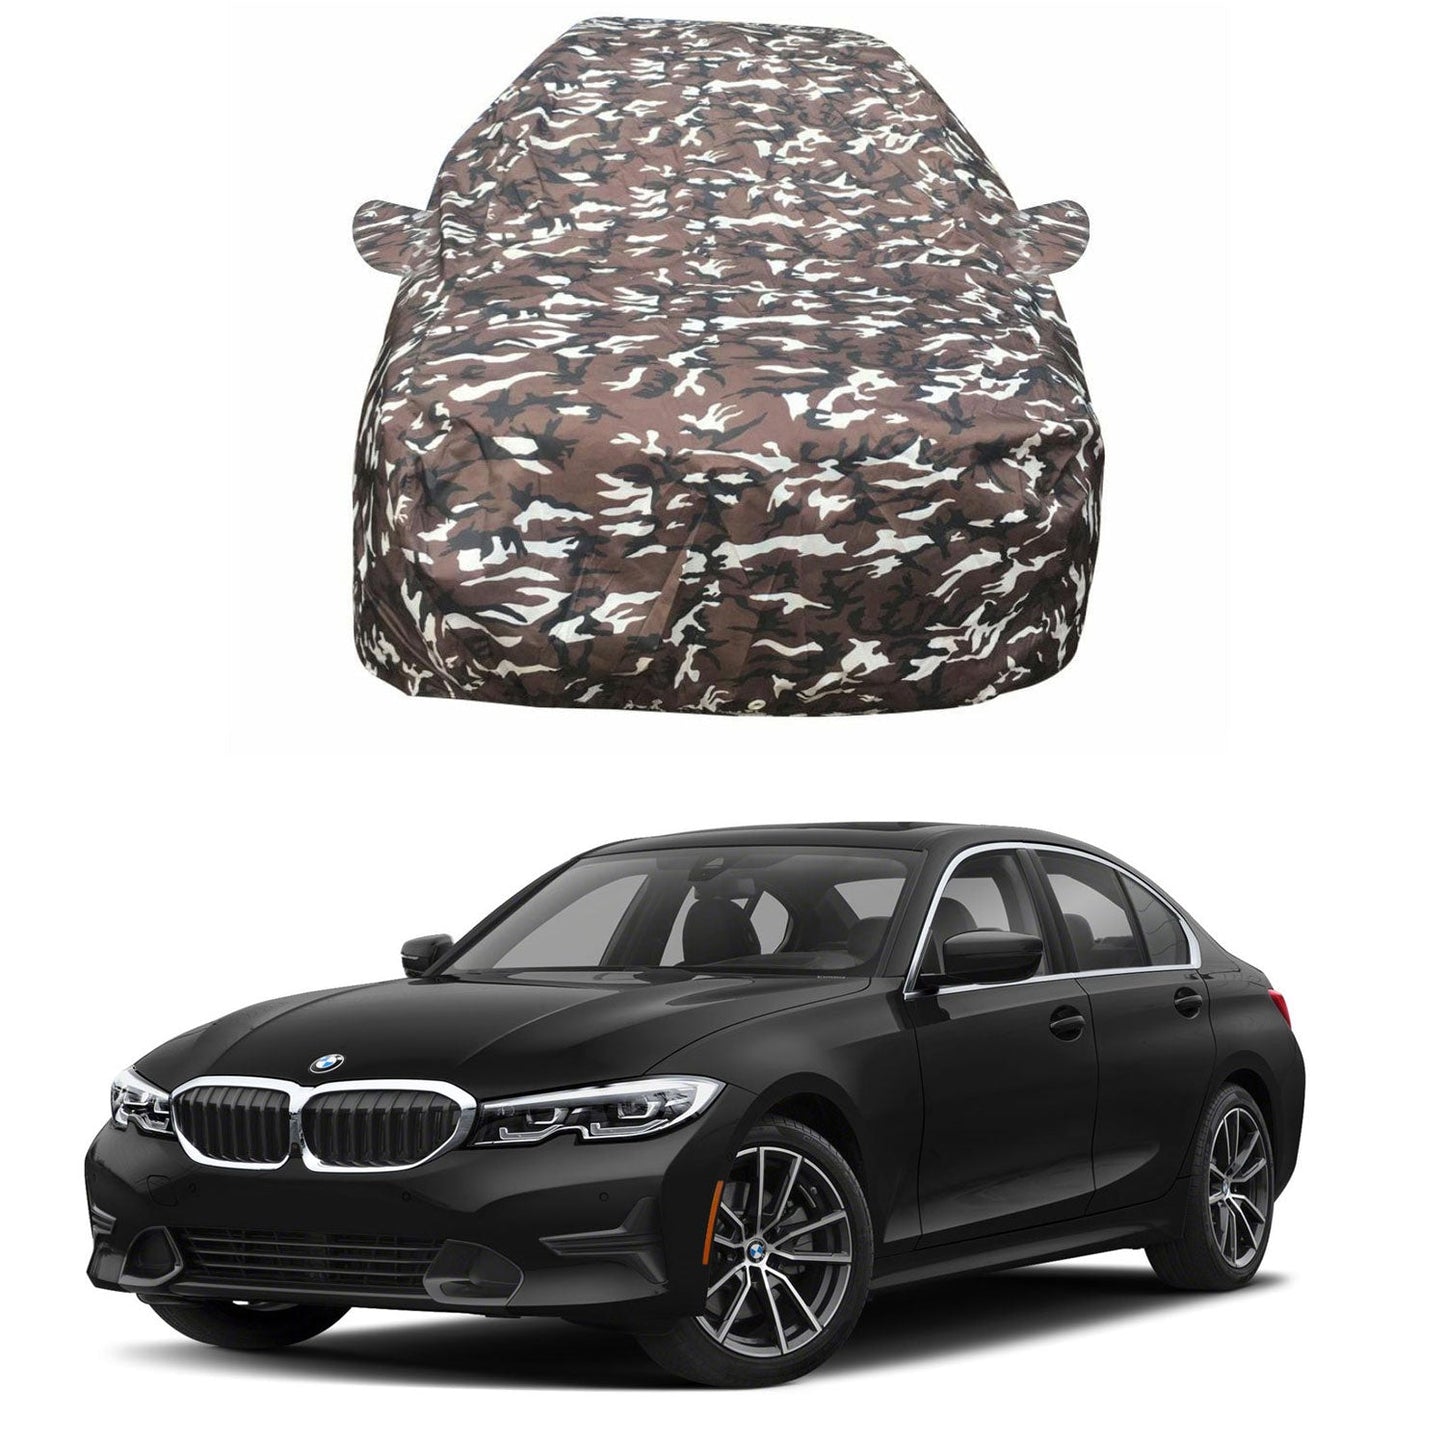 Oshotto Ranger Design Made of 100% Waterproof Fabric Car Body Cover with Mirror Pocket For BMW 3 Series 2020-2023